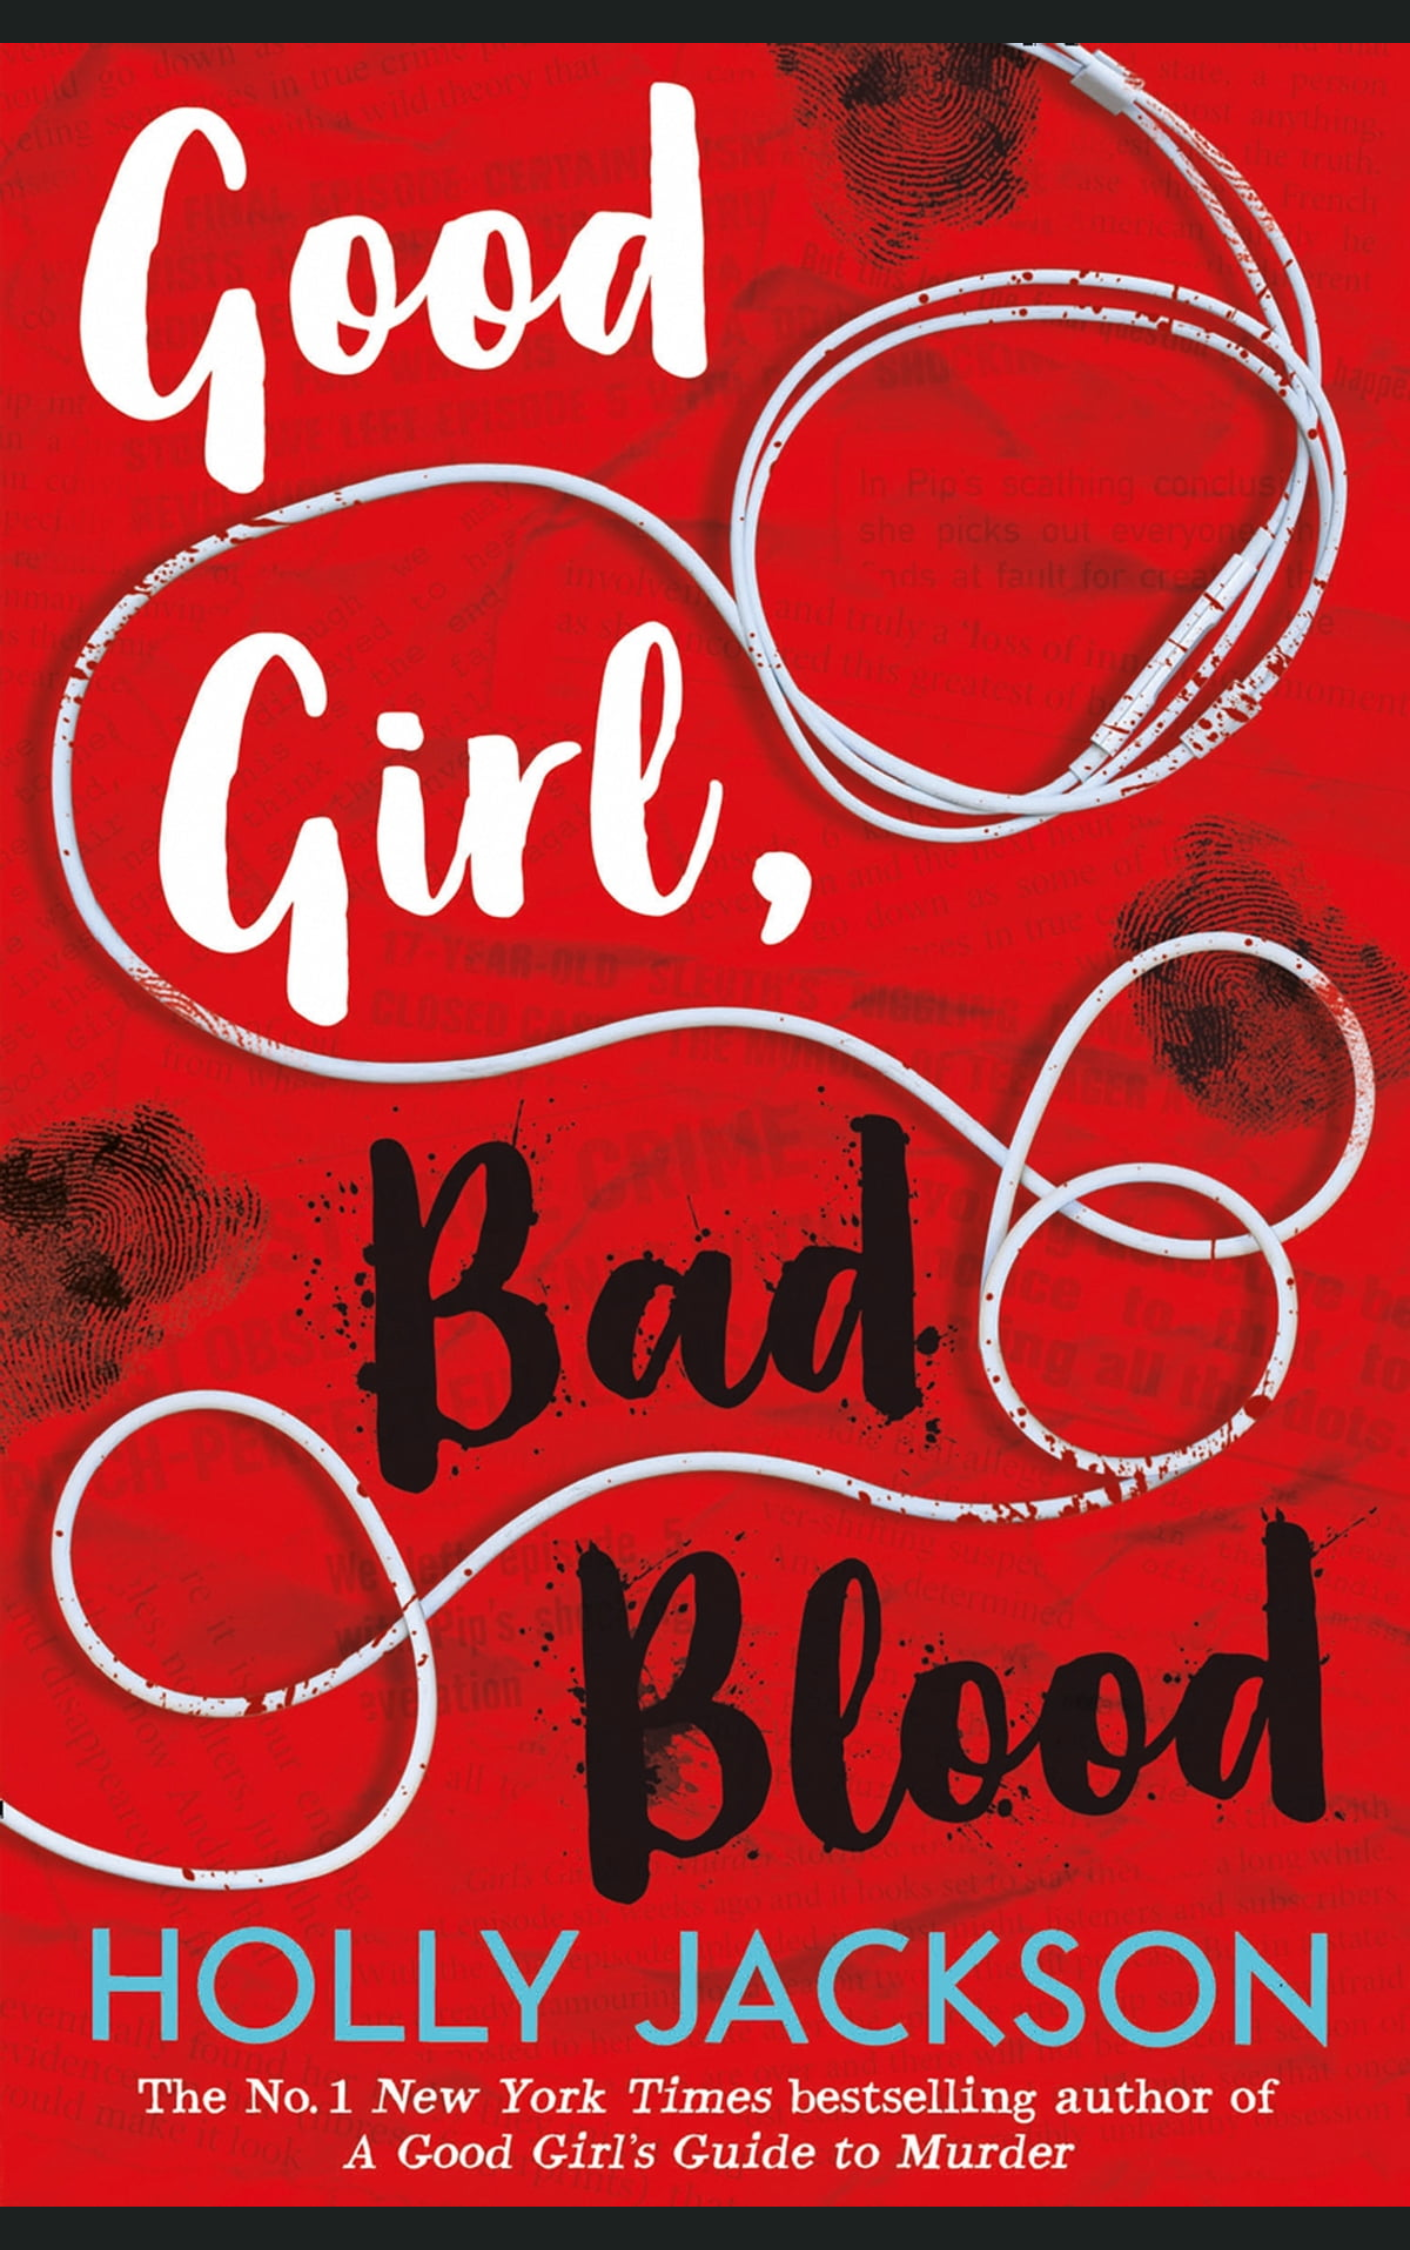 GOOD GIRL BAD BLOOD by HOLLY JACKSON